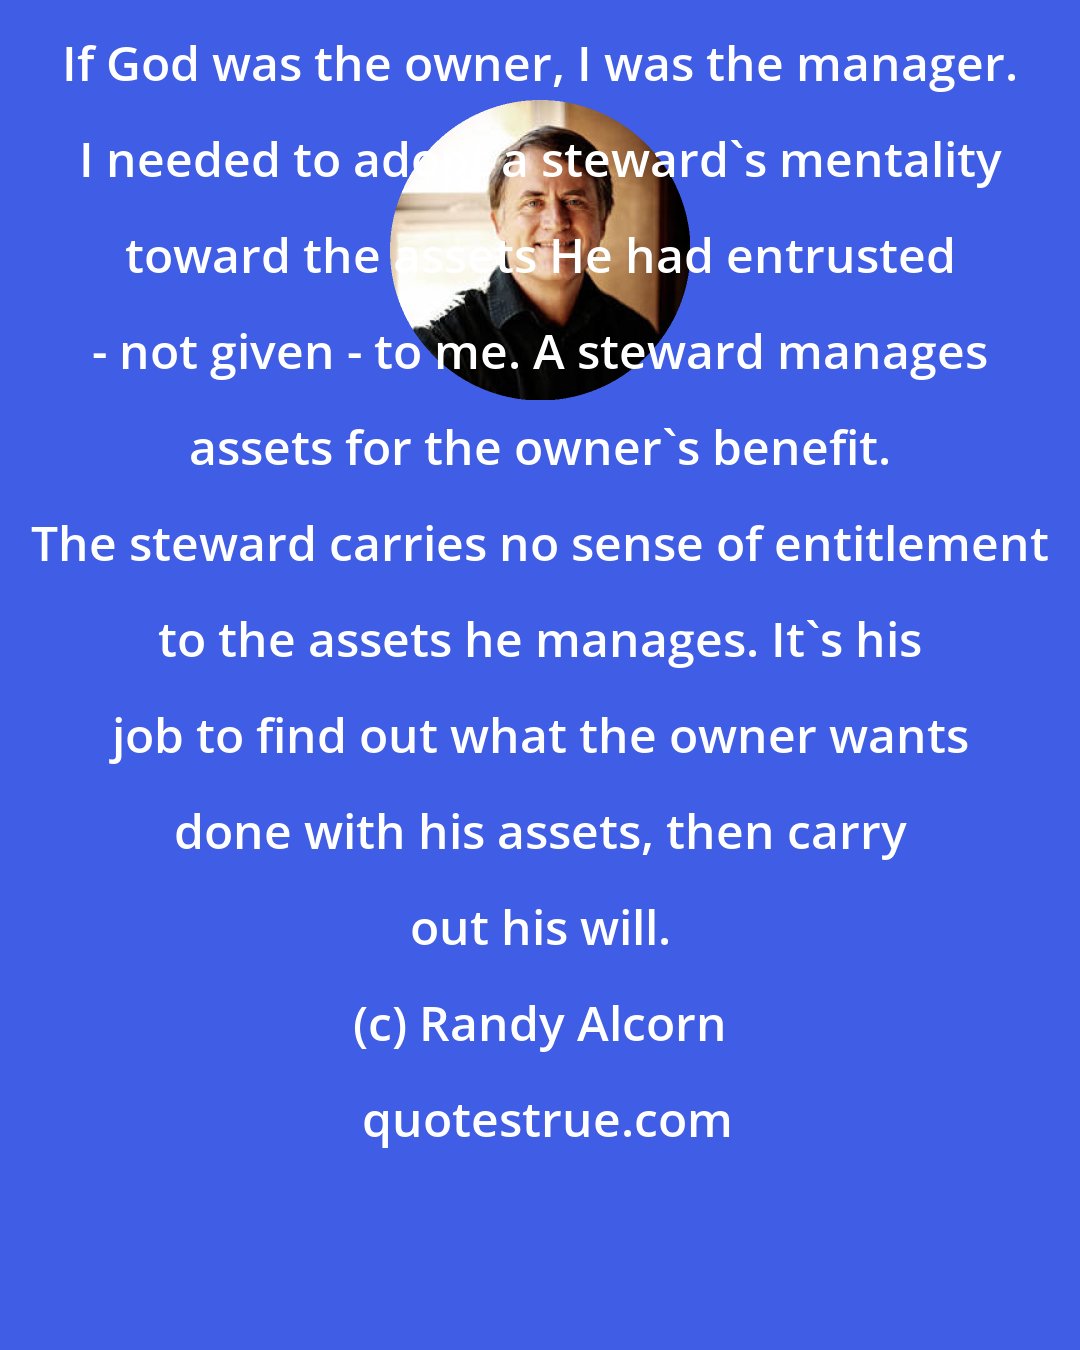 Randy Alcorn: If God was the owner, I was the manager. I needed to adopt a steward's mentality toward the assets He had entrusted - not given - to me. A steward manages assets for the owner's benefit. The steward carries no sense of entitlement to the assets he manages. It's his job to find out what the owner wants done with his assets, then carry out his will.